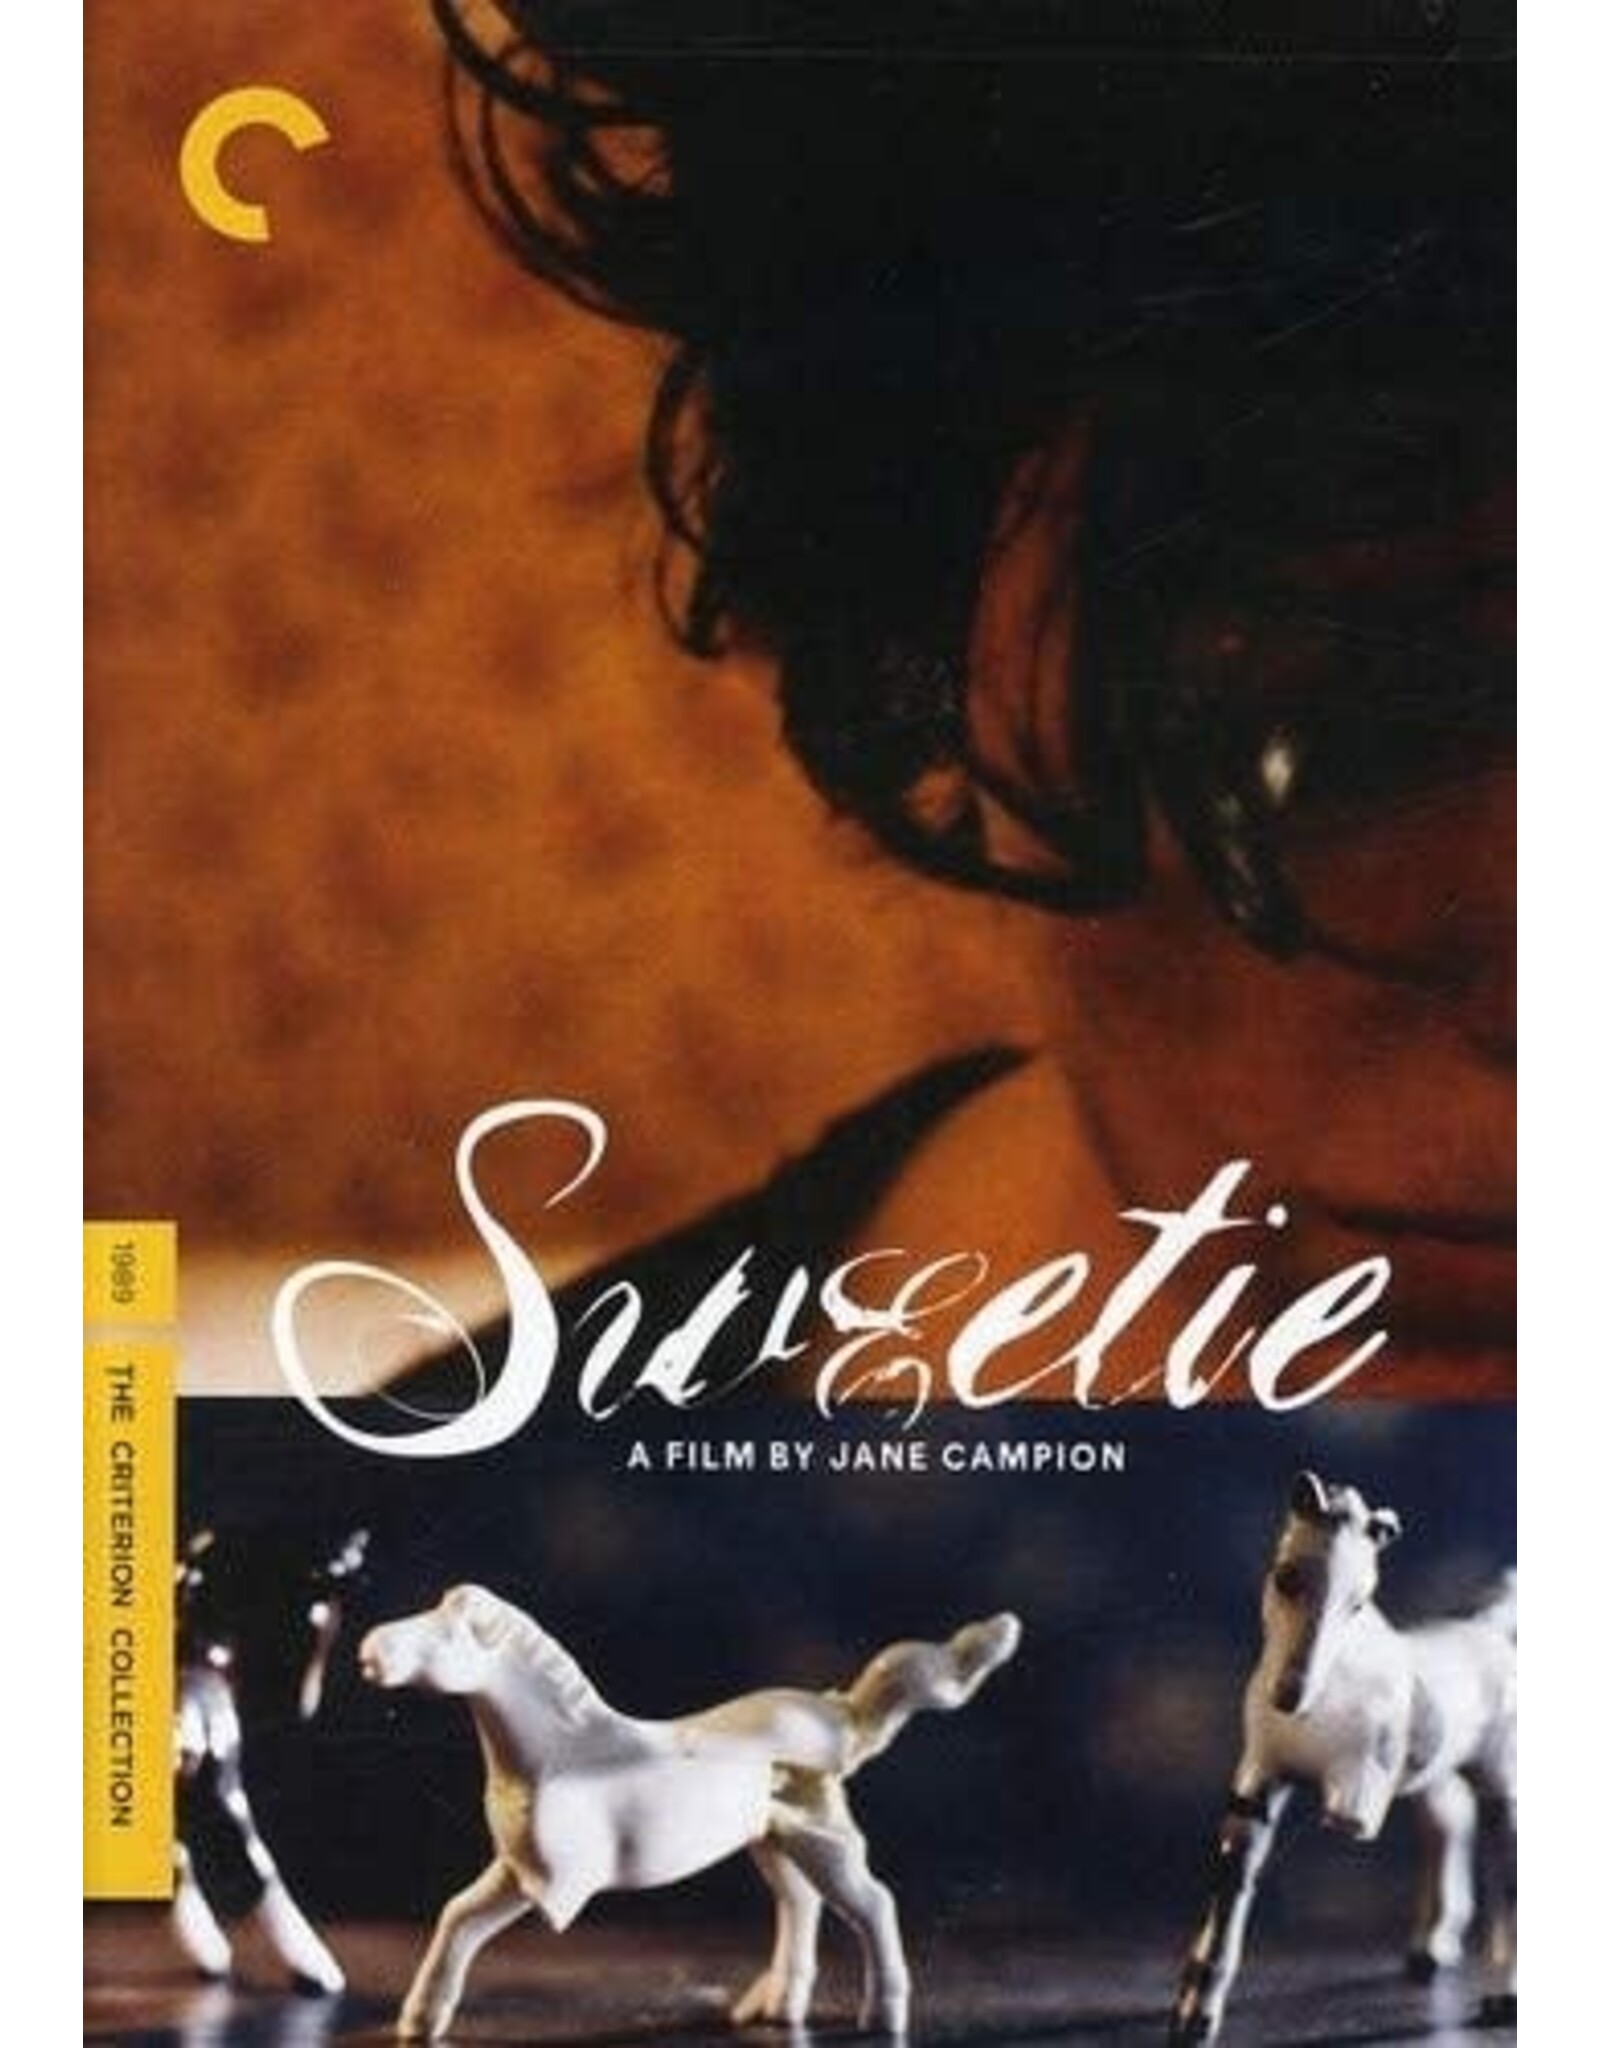 Criterion Collection Sweetie - Criterion Collection (Used)